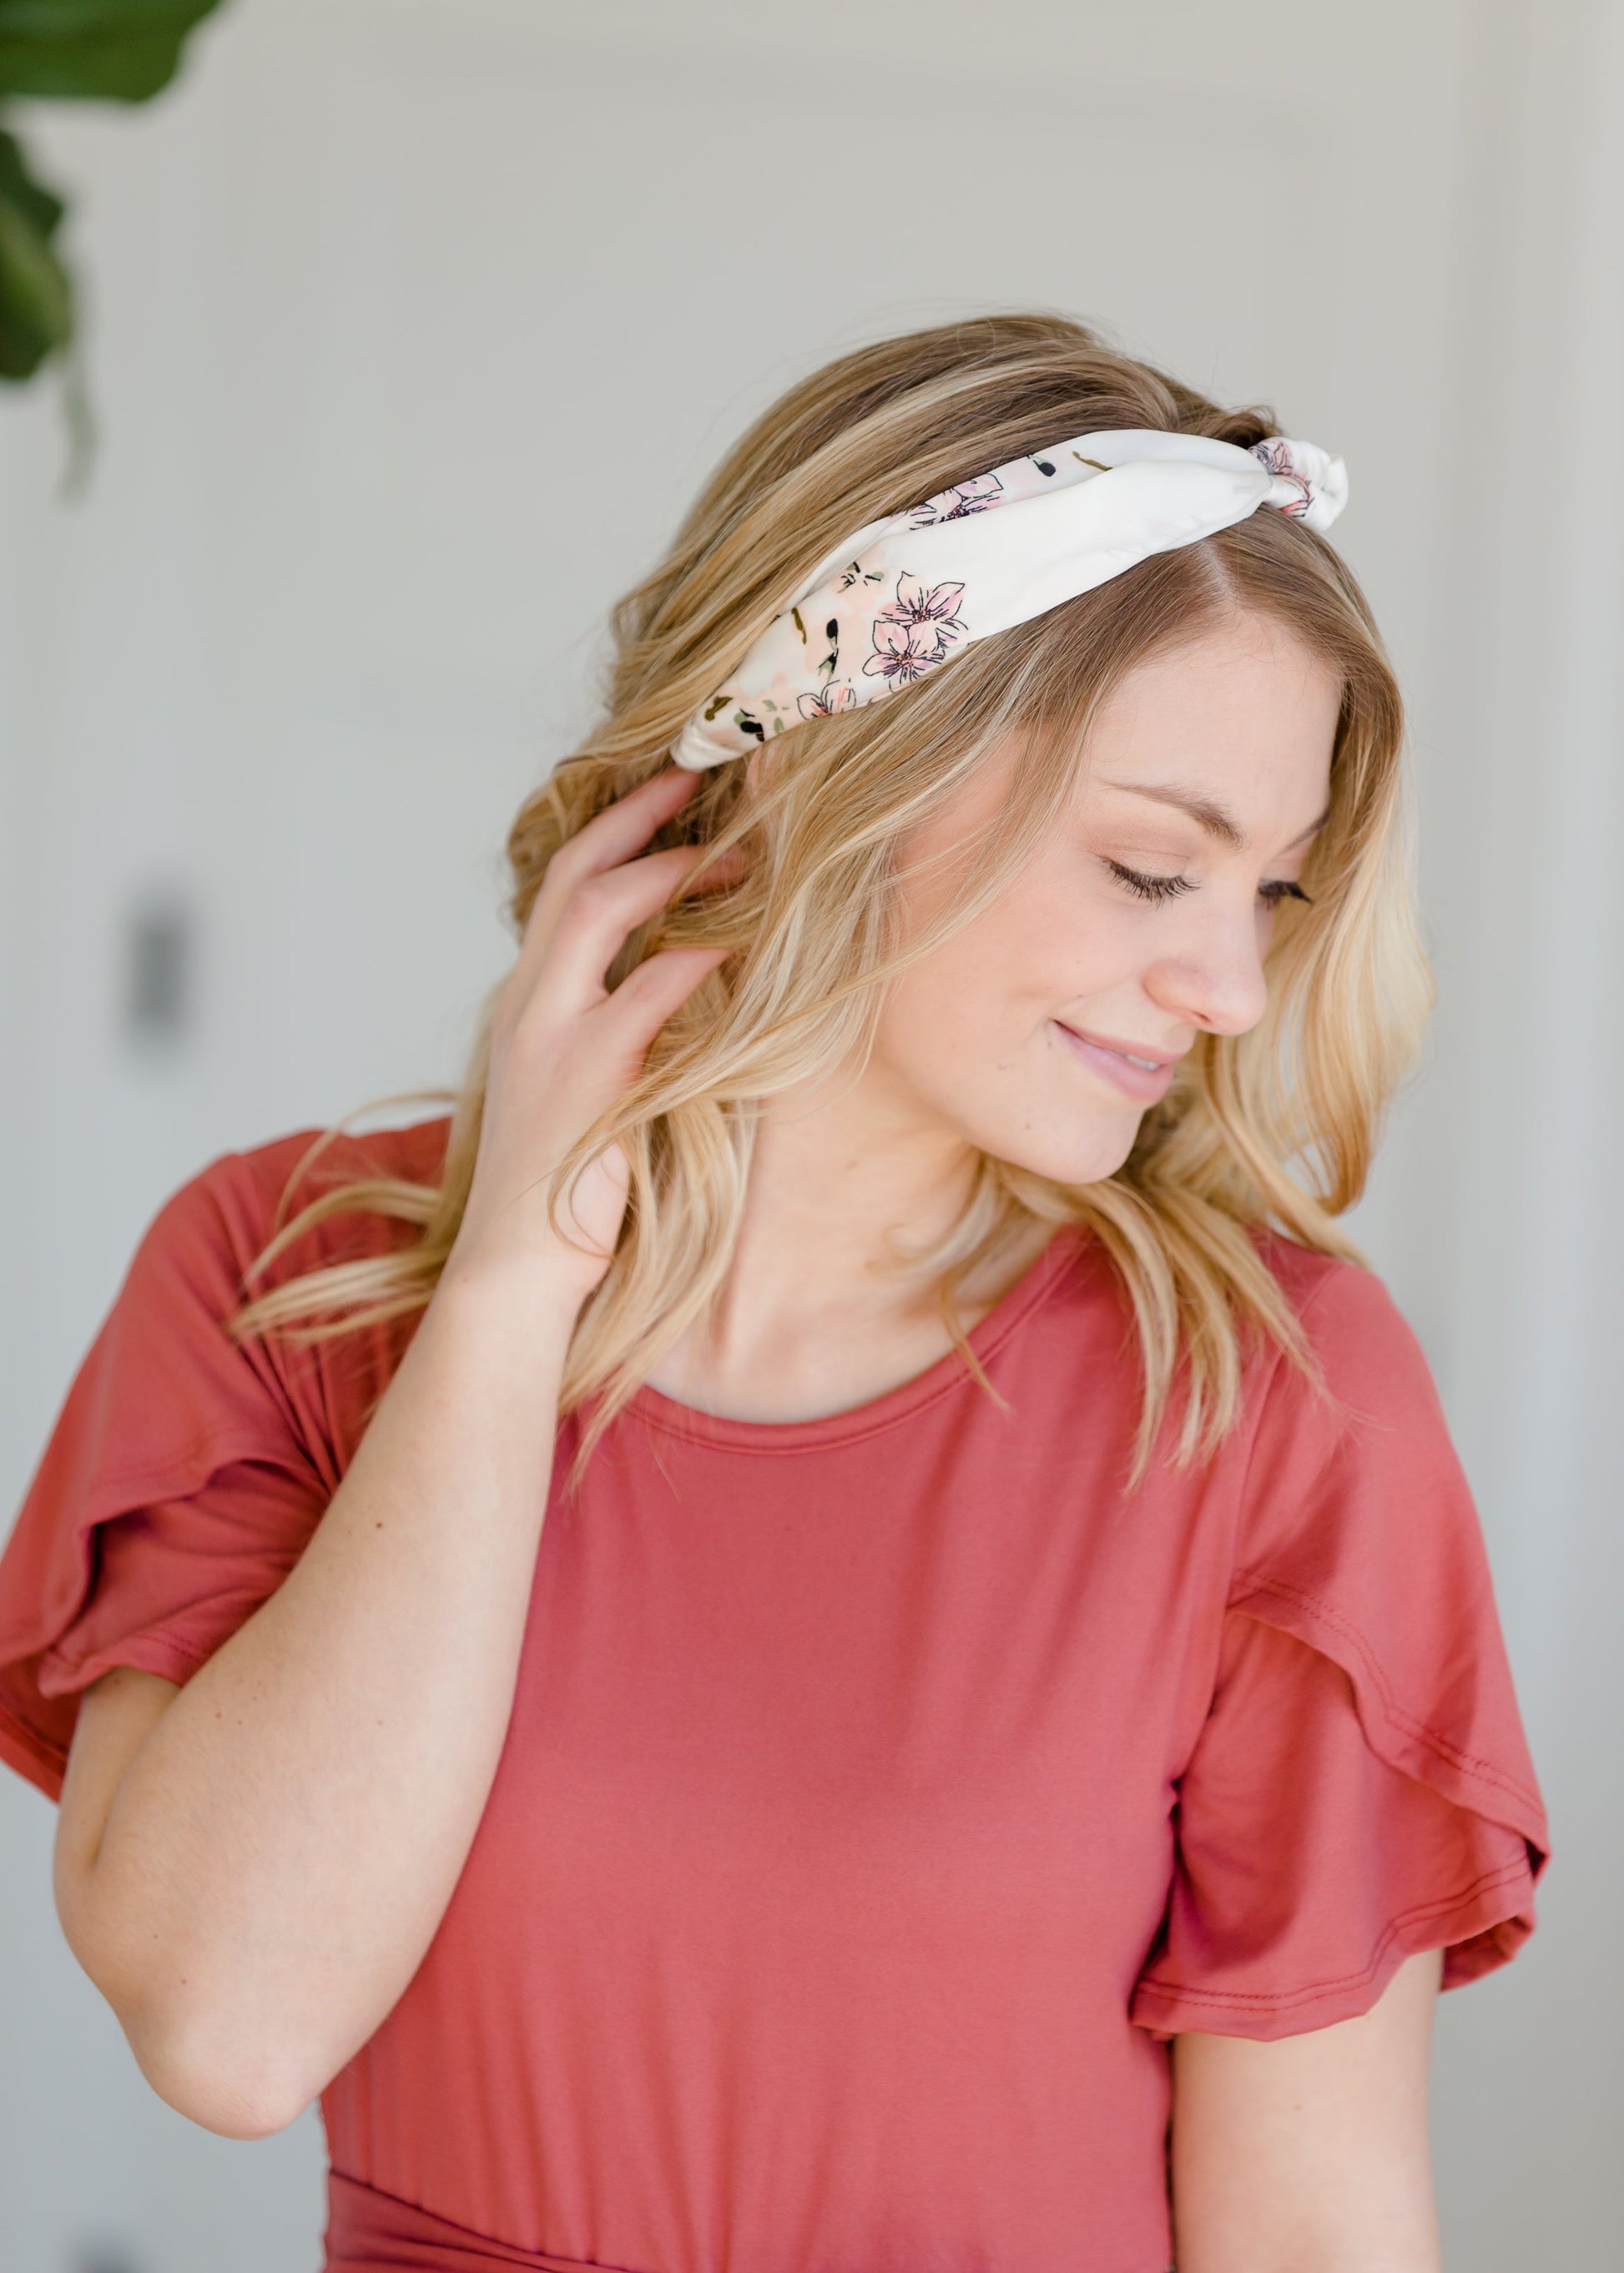 White Floral Knotted Headband Accessories